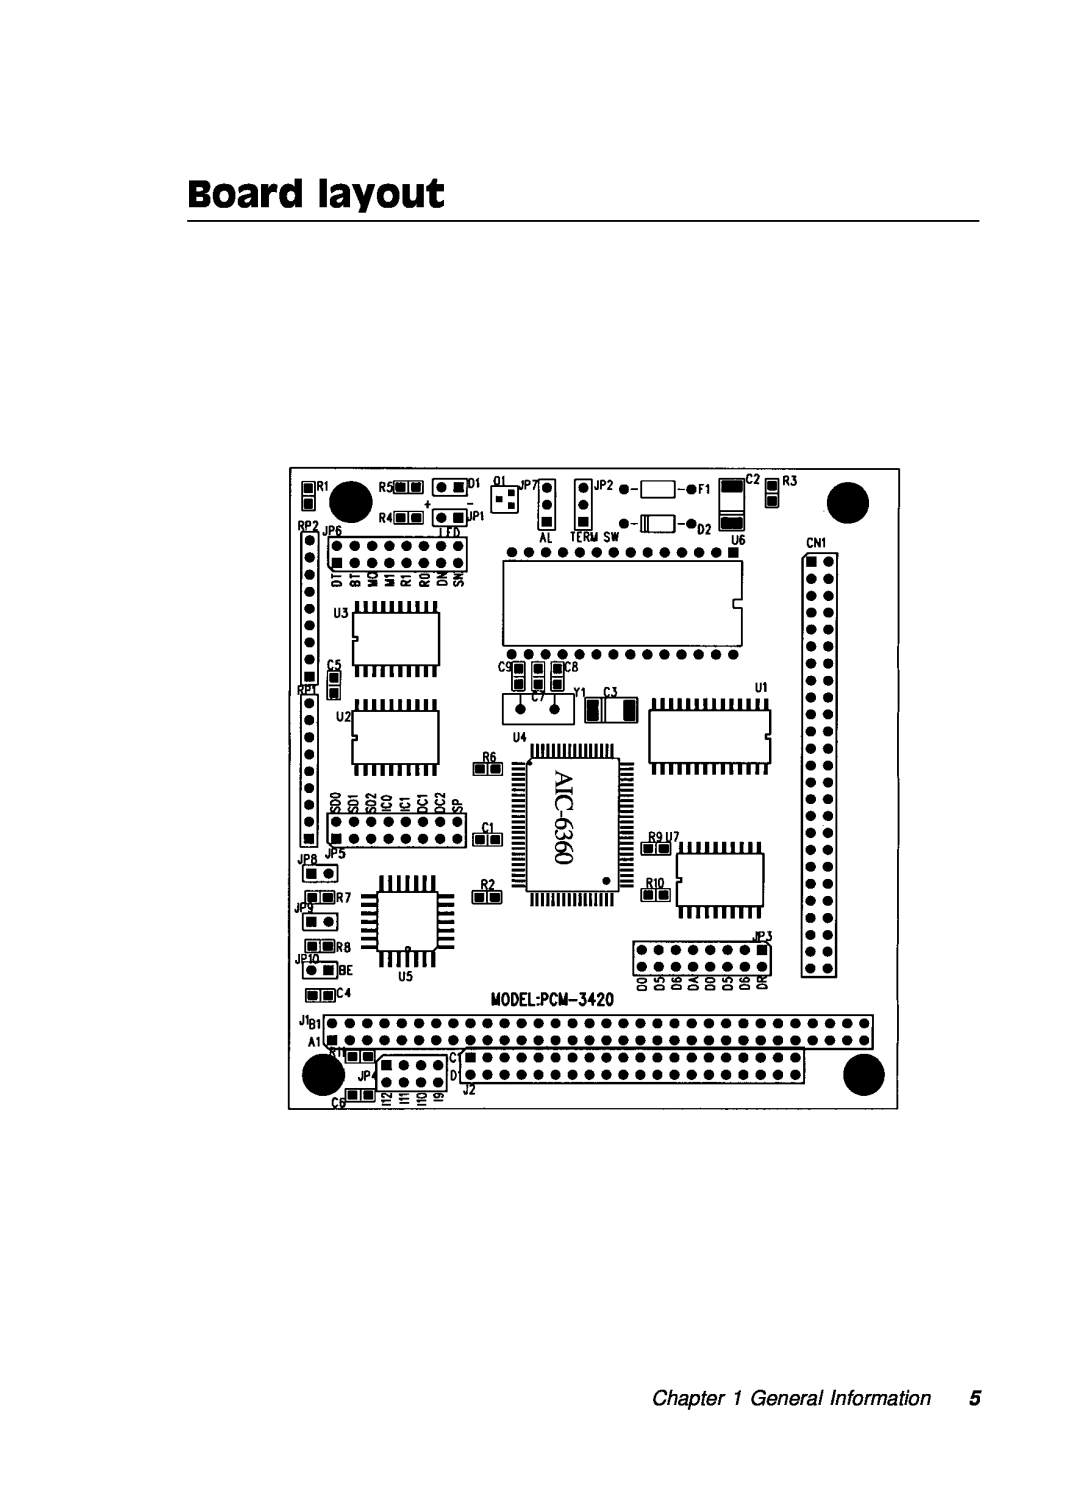 Adaptec PC/104, PCM-3420 manual Board layout, AIC-6360, General Information 